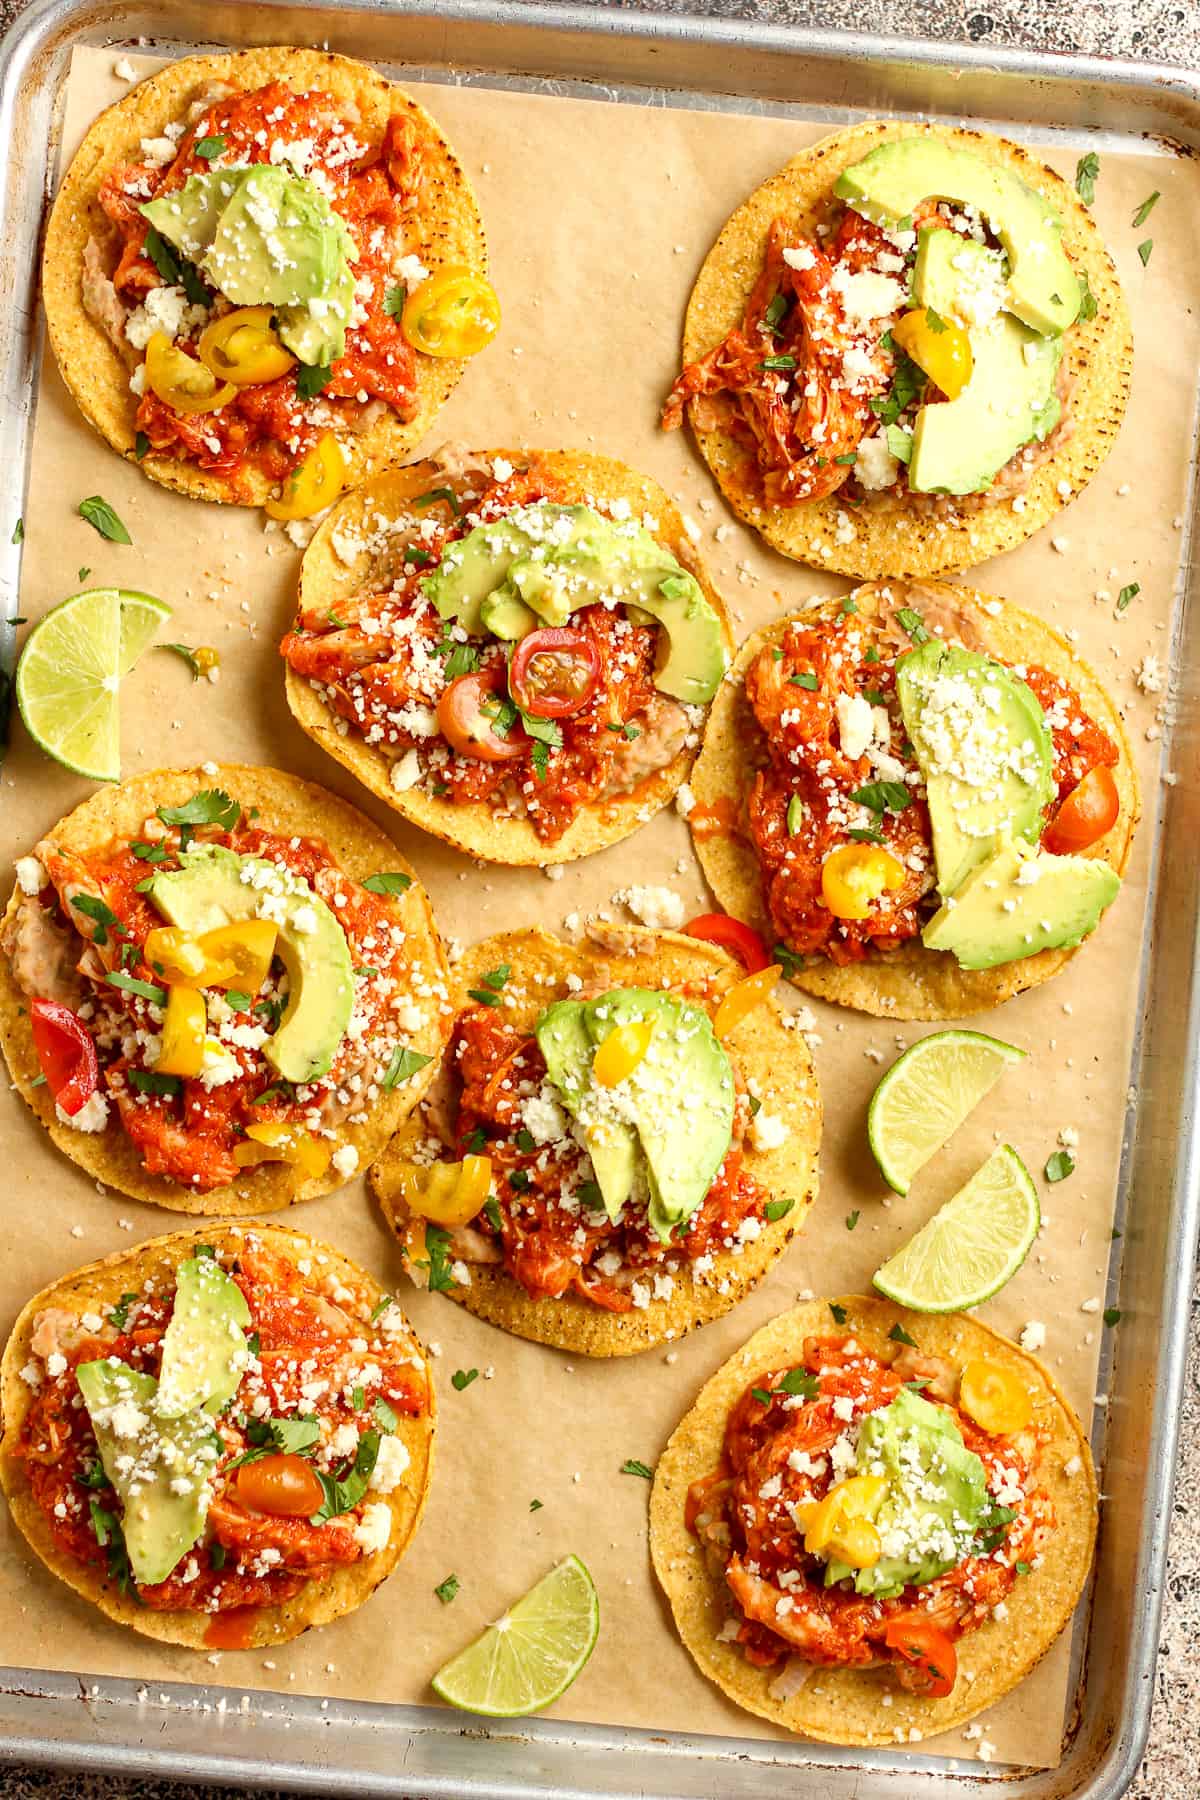 Overhead view of a large sheet pan of just made Tinga tostadas, with cilantro and other toppings.